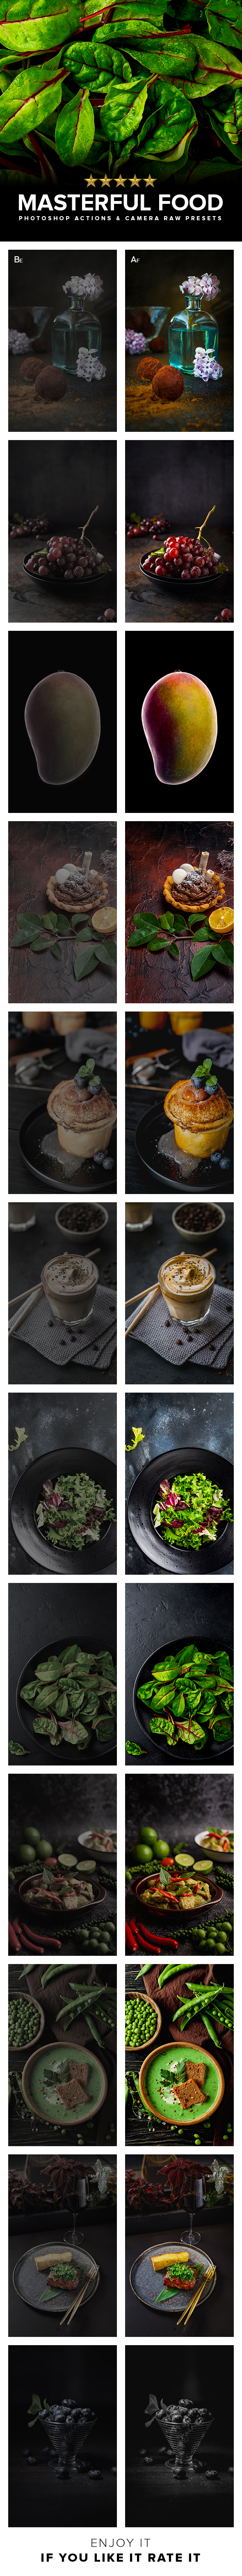 MASTERFUL FOOD Photoshop Action And Camera Raw Presets Pack